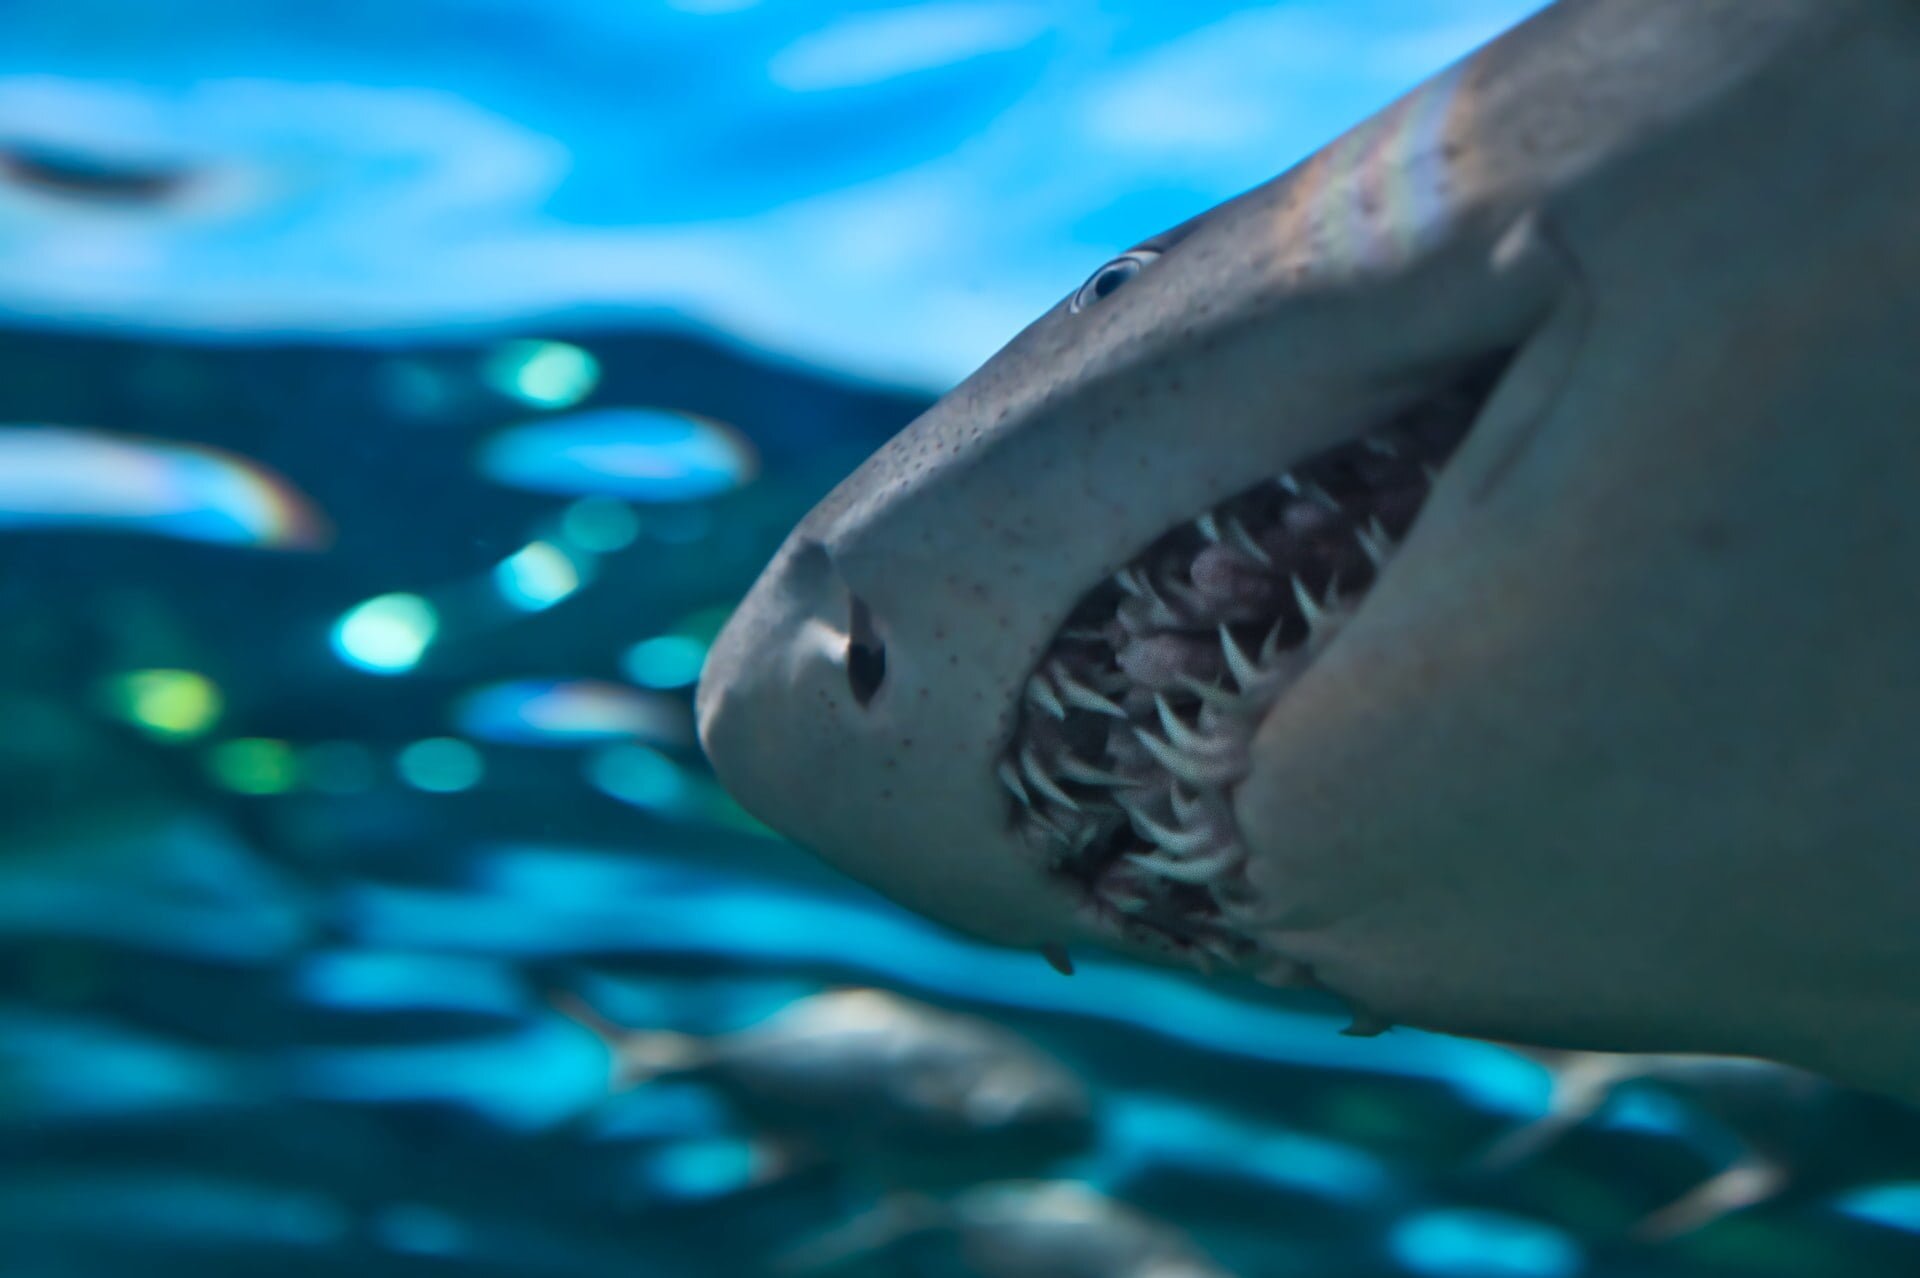 Sharks can survive cataclysms amazing facts about the masters of adaptation 1 1